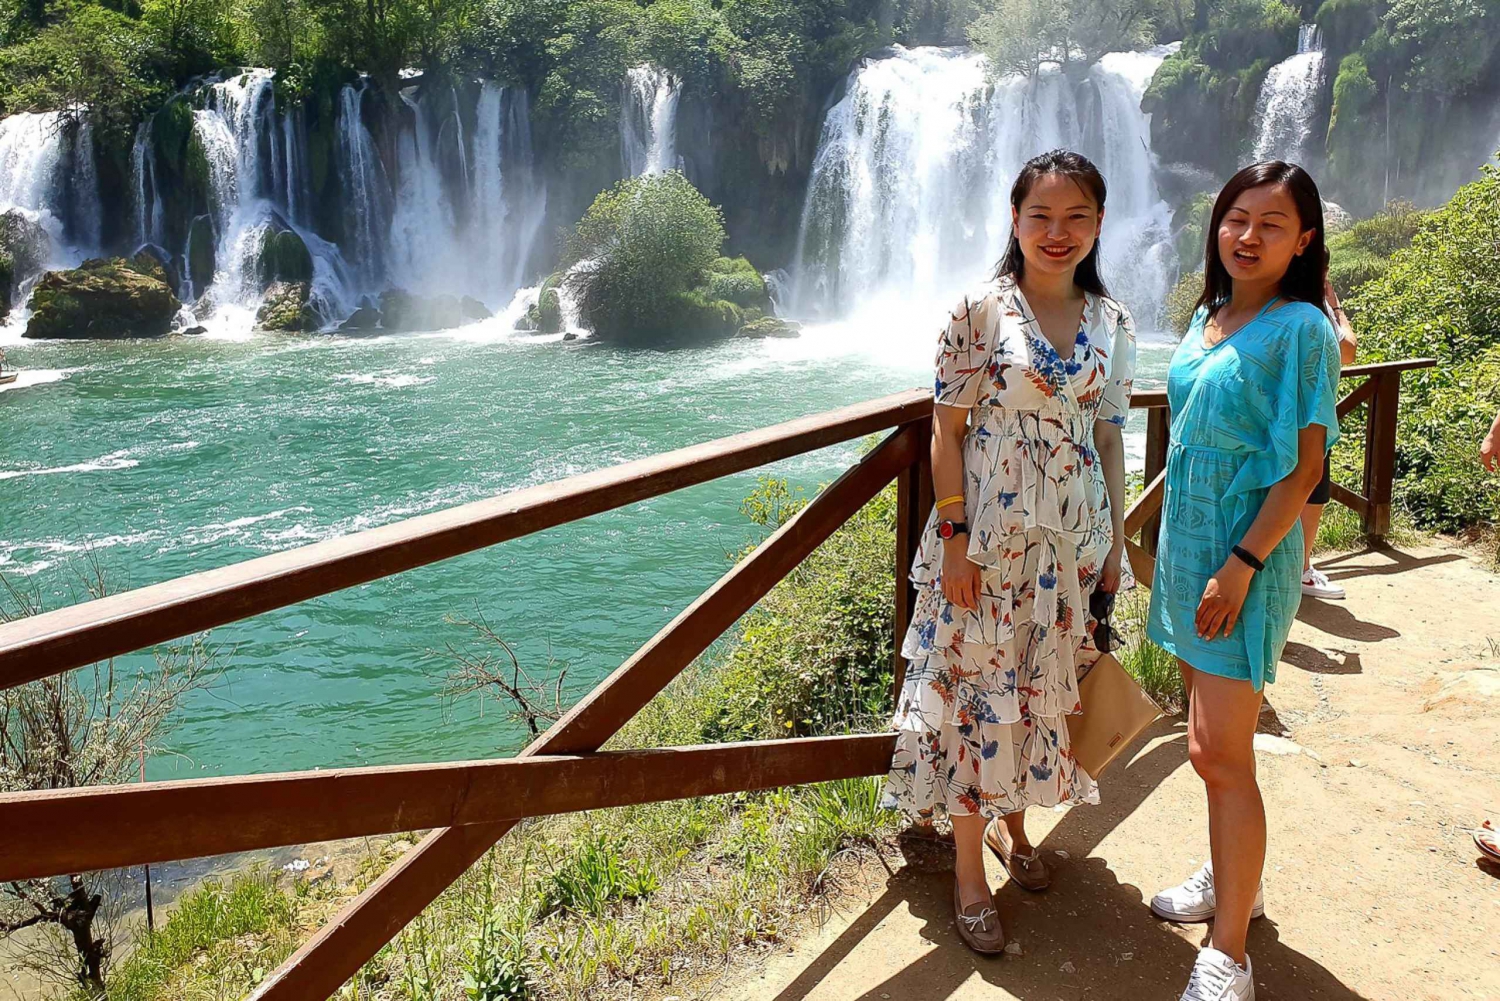 From Dubrovnik: Mostar and Kravice Full-Day Tour